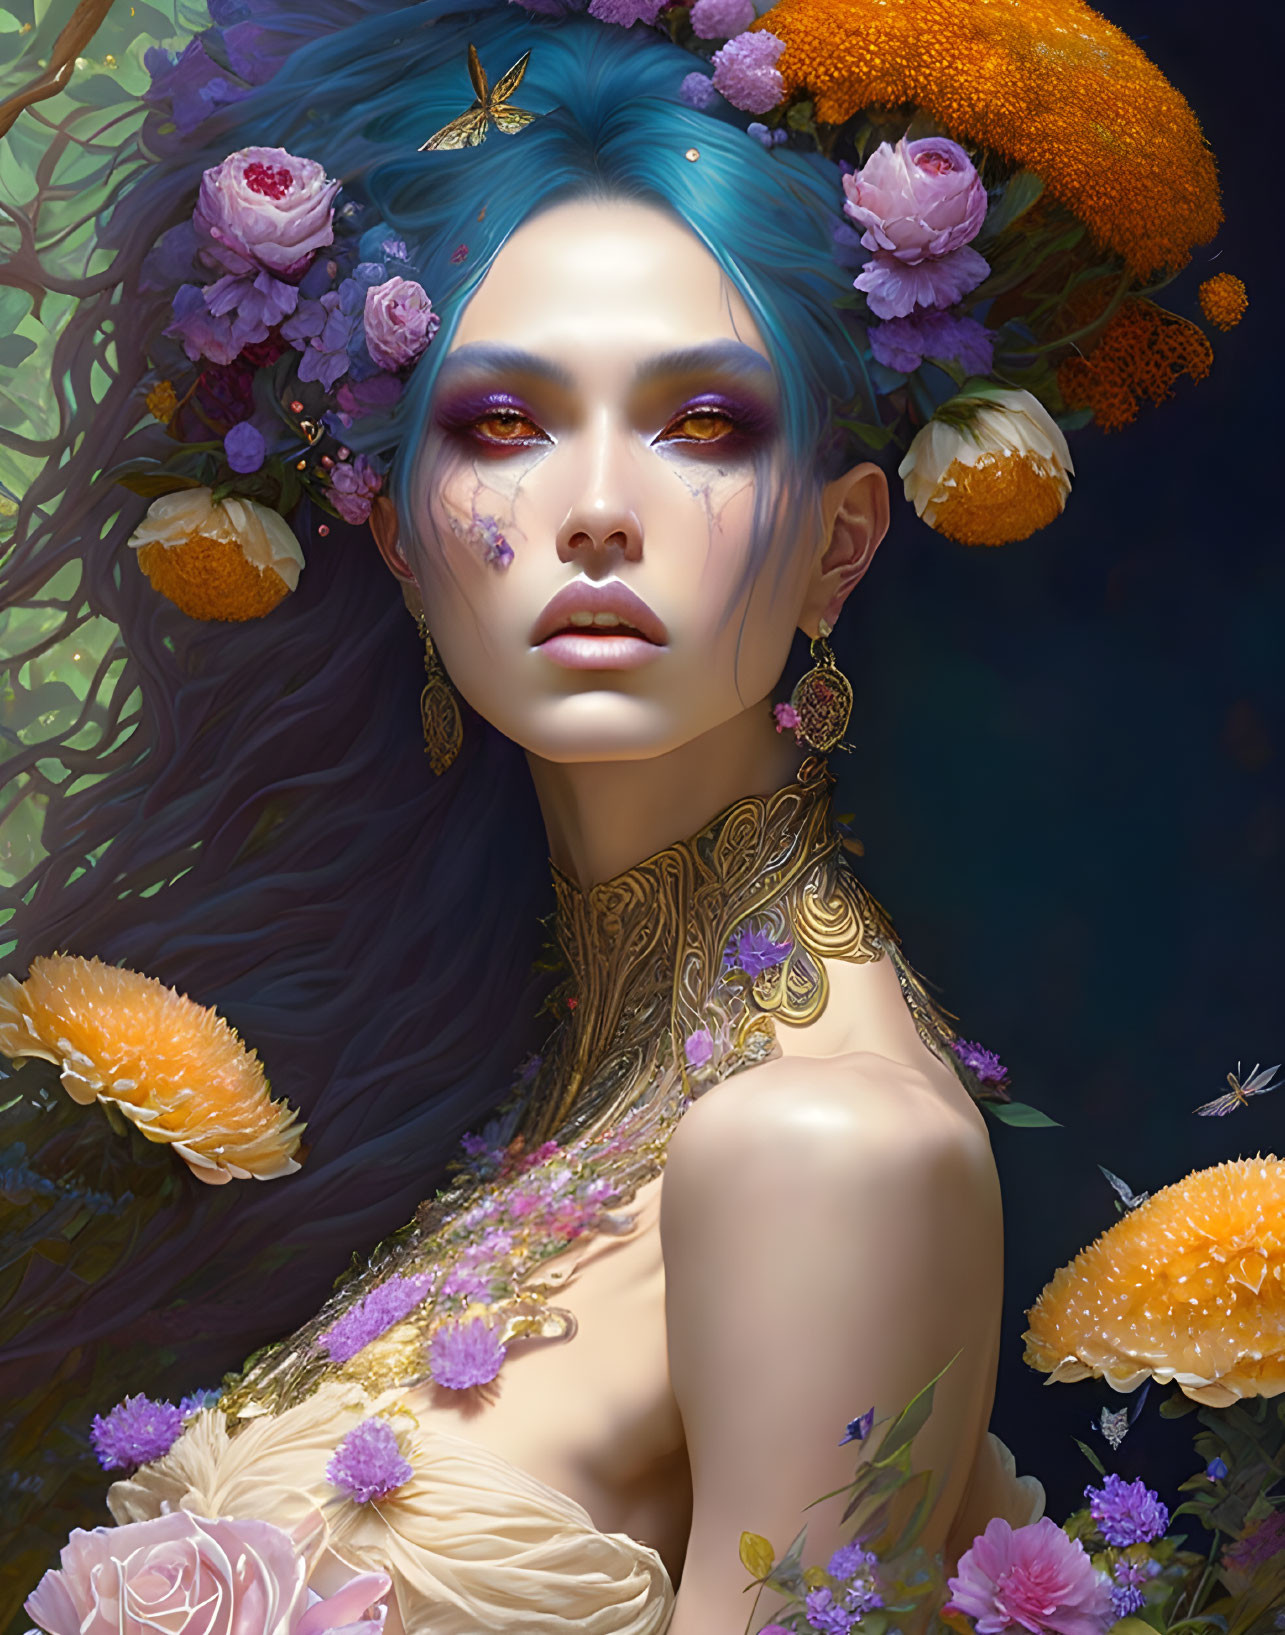 Fantasy portrait of woman with blue hair, adorned with flowers, butterflies, gold tattoos, and vibrant